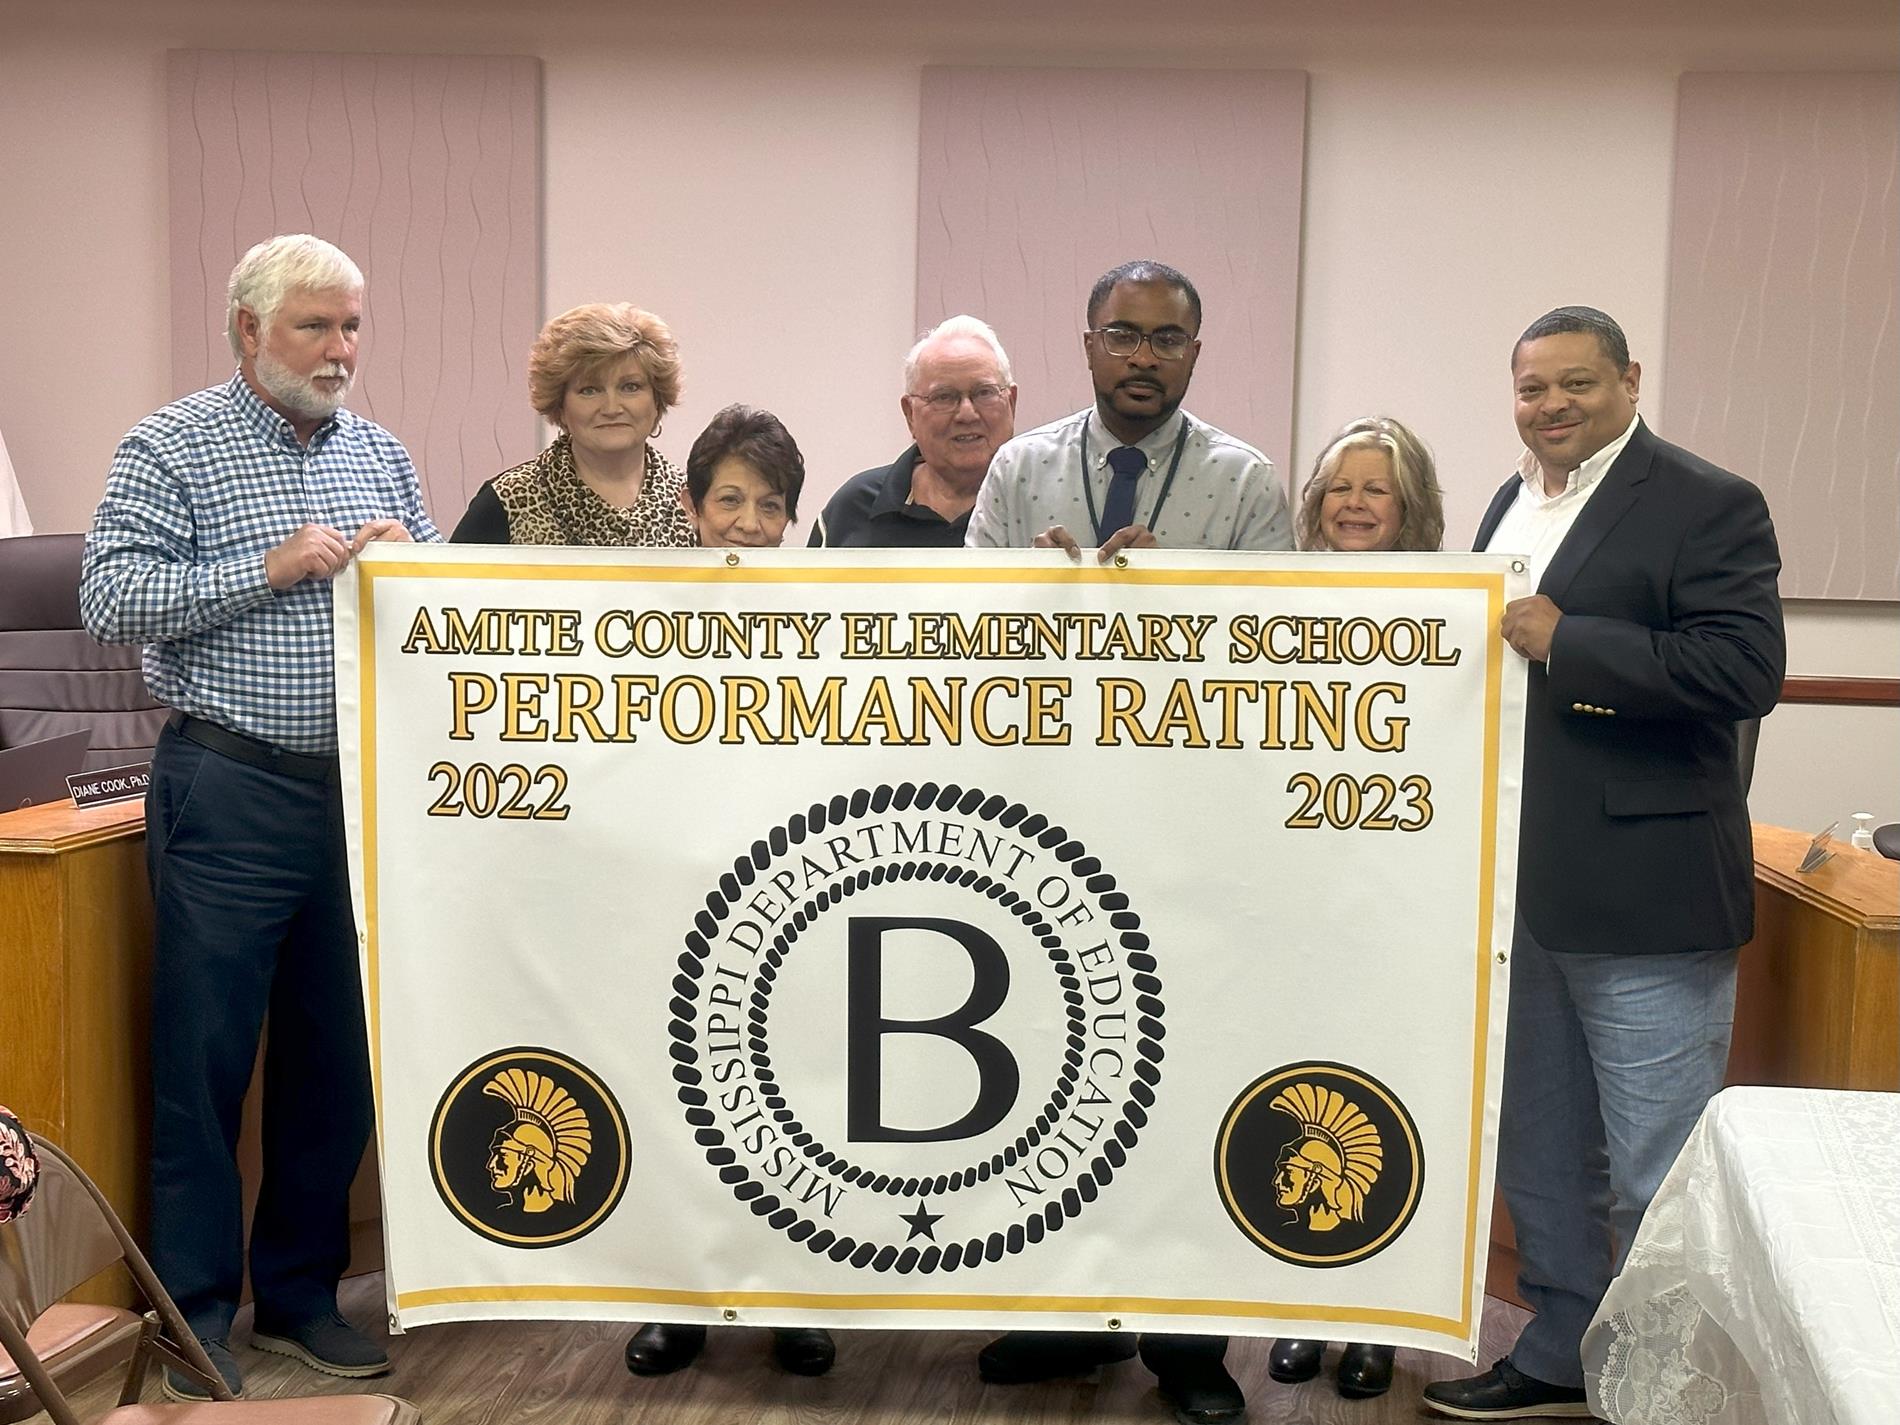 Elementary School Recognition for B Rating